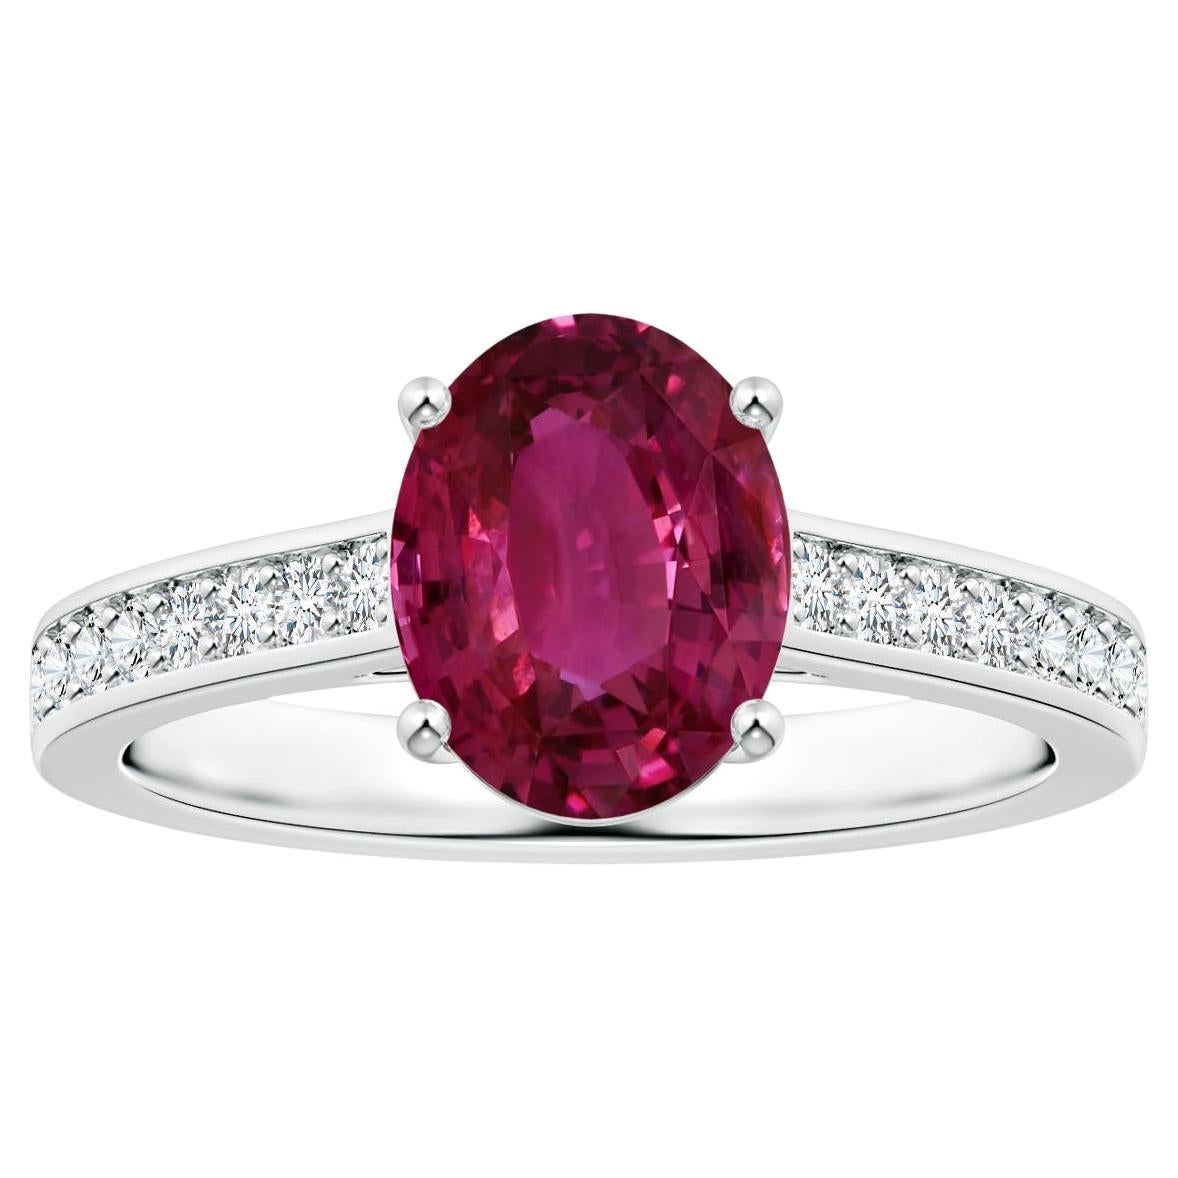 For Sale:  ANGARA Prong-Set GIA Certified Pink Sapphire Ring in White Gold with Diamonds